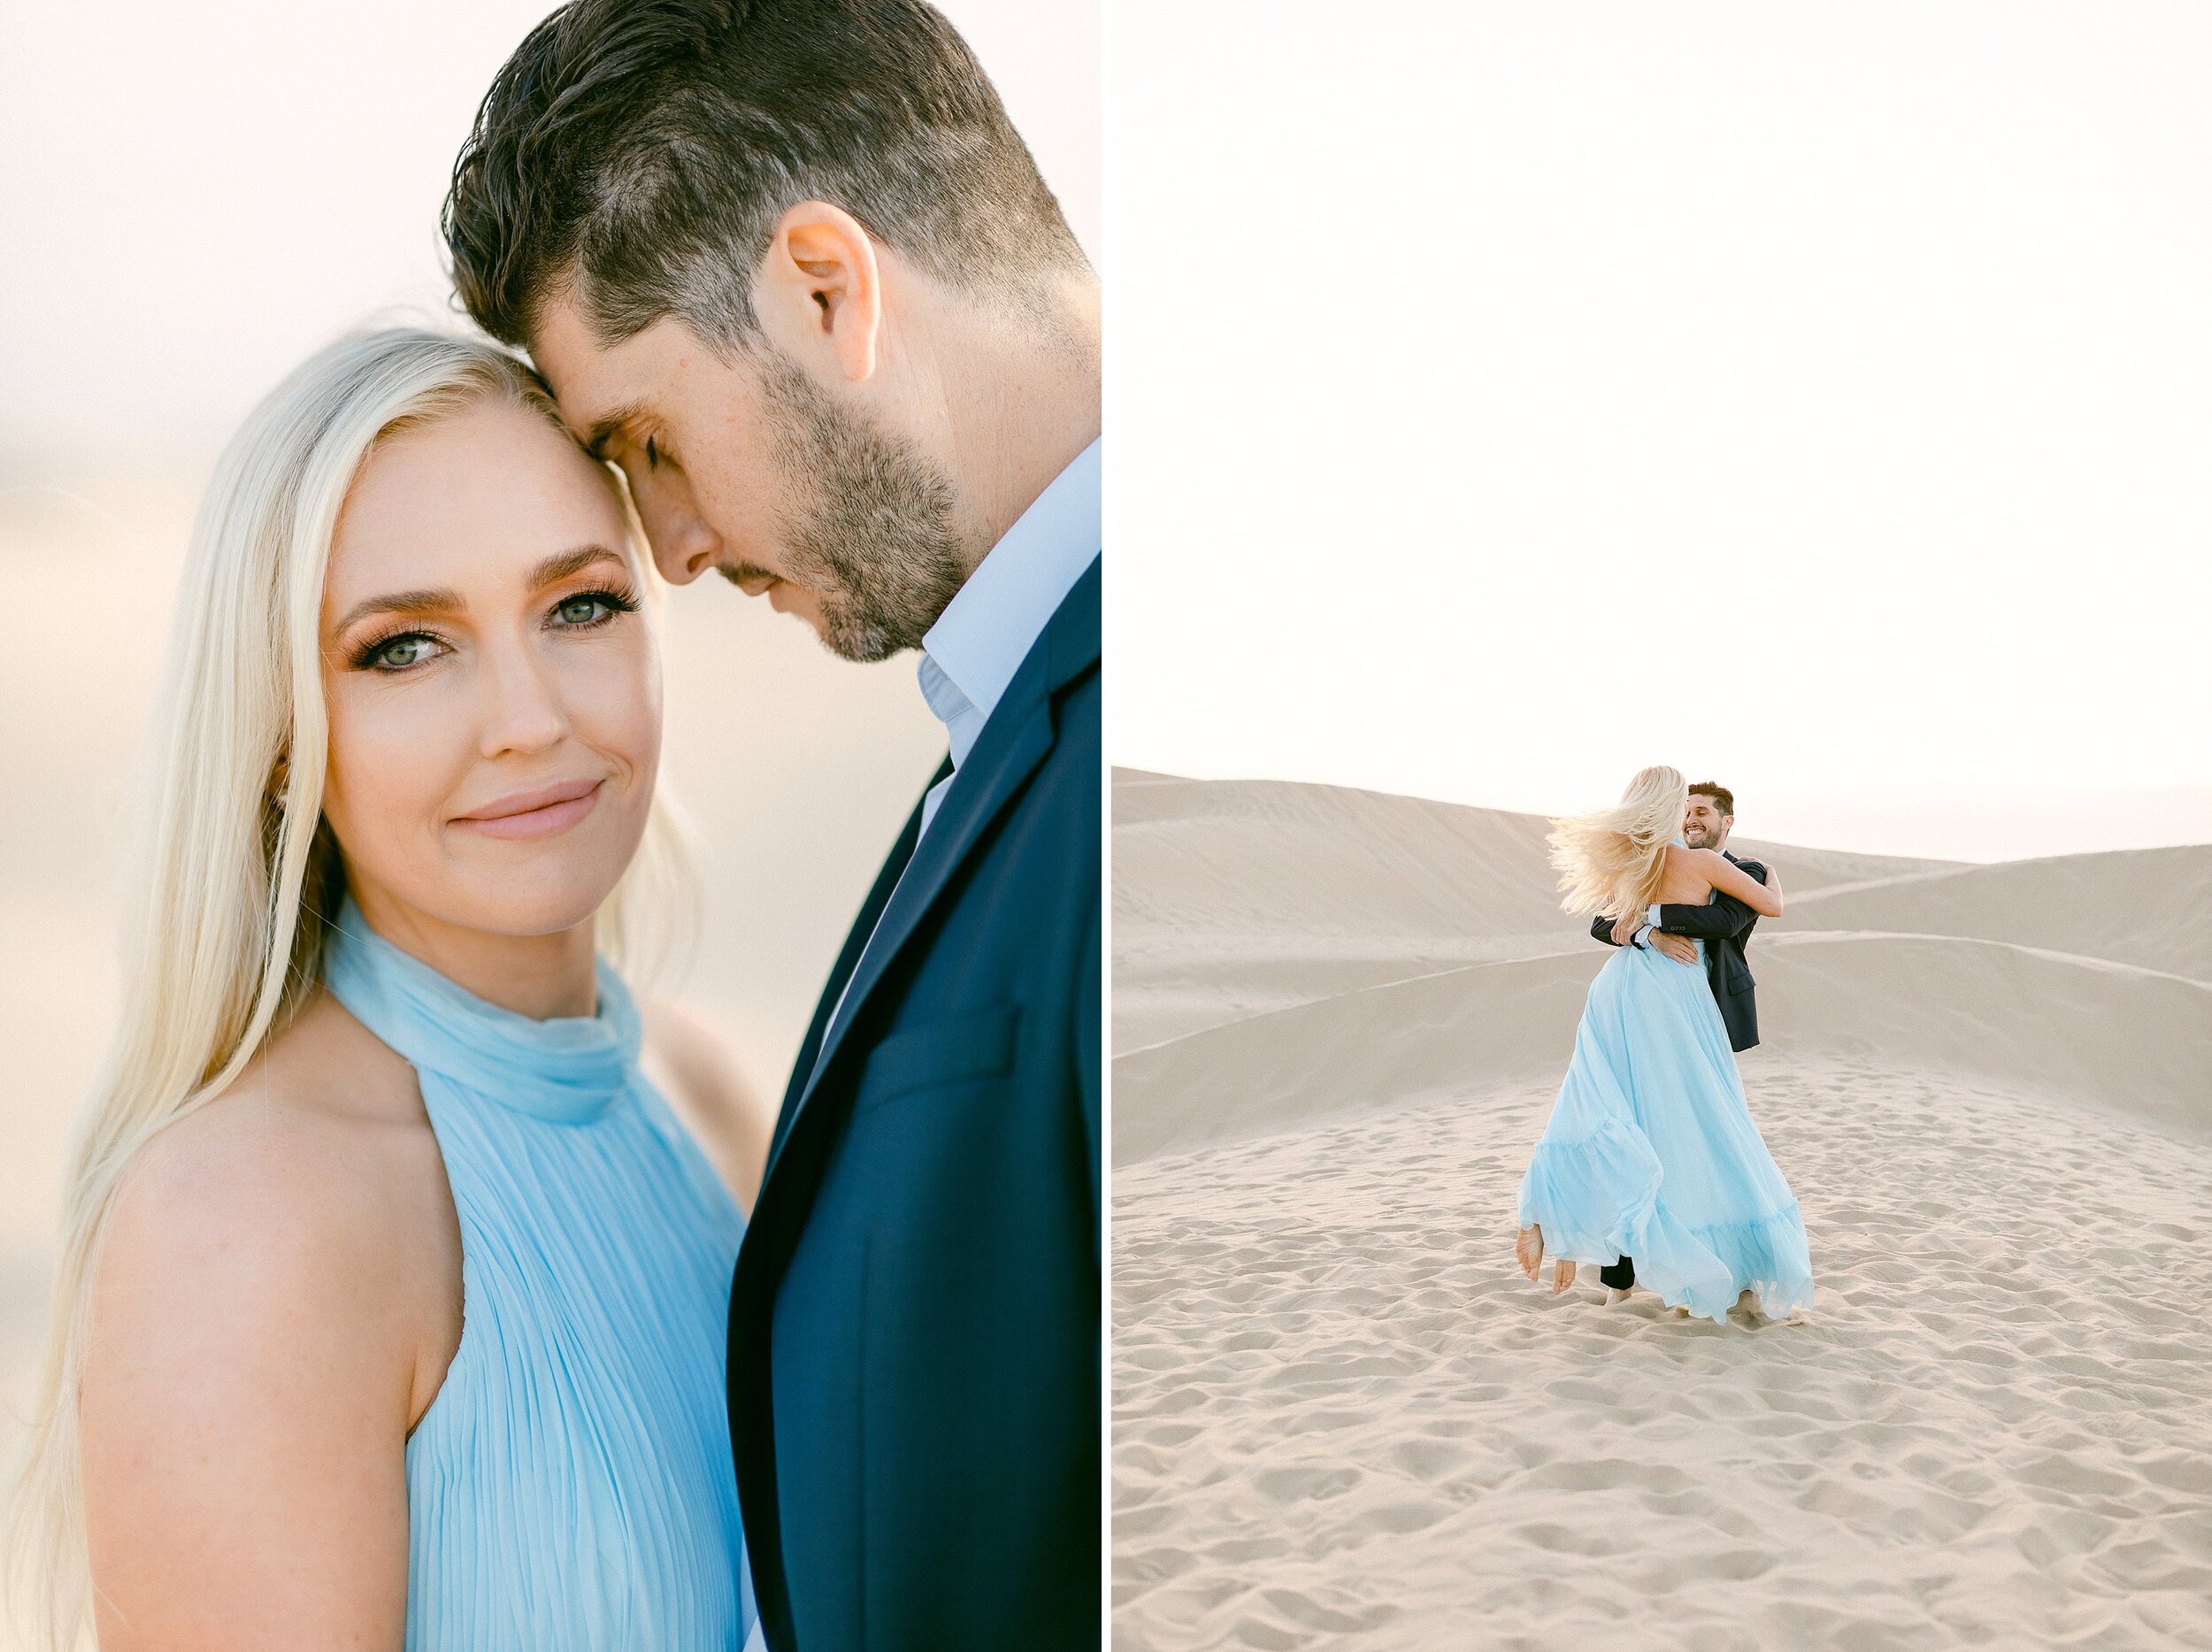 Brunette male in navy blue suite sweeps his blonde fiance in powder blue dress off her feet and spins her around during their sunset sand dunes engagement photos 